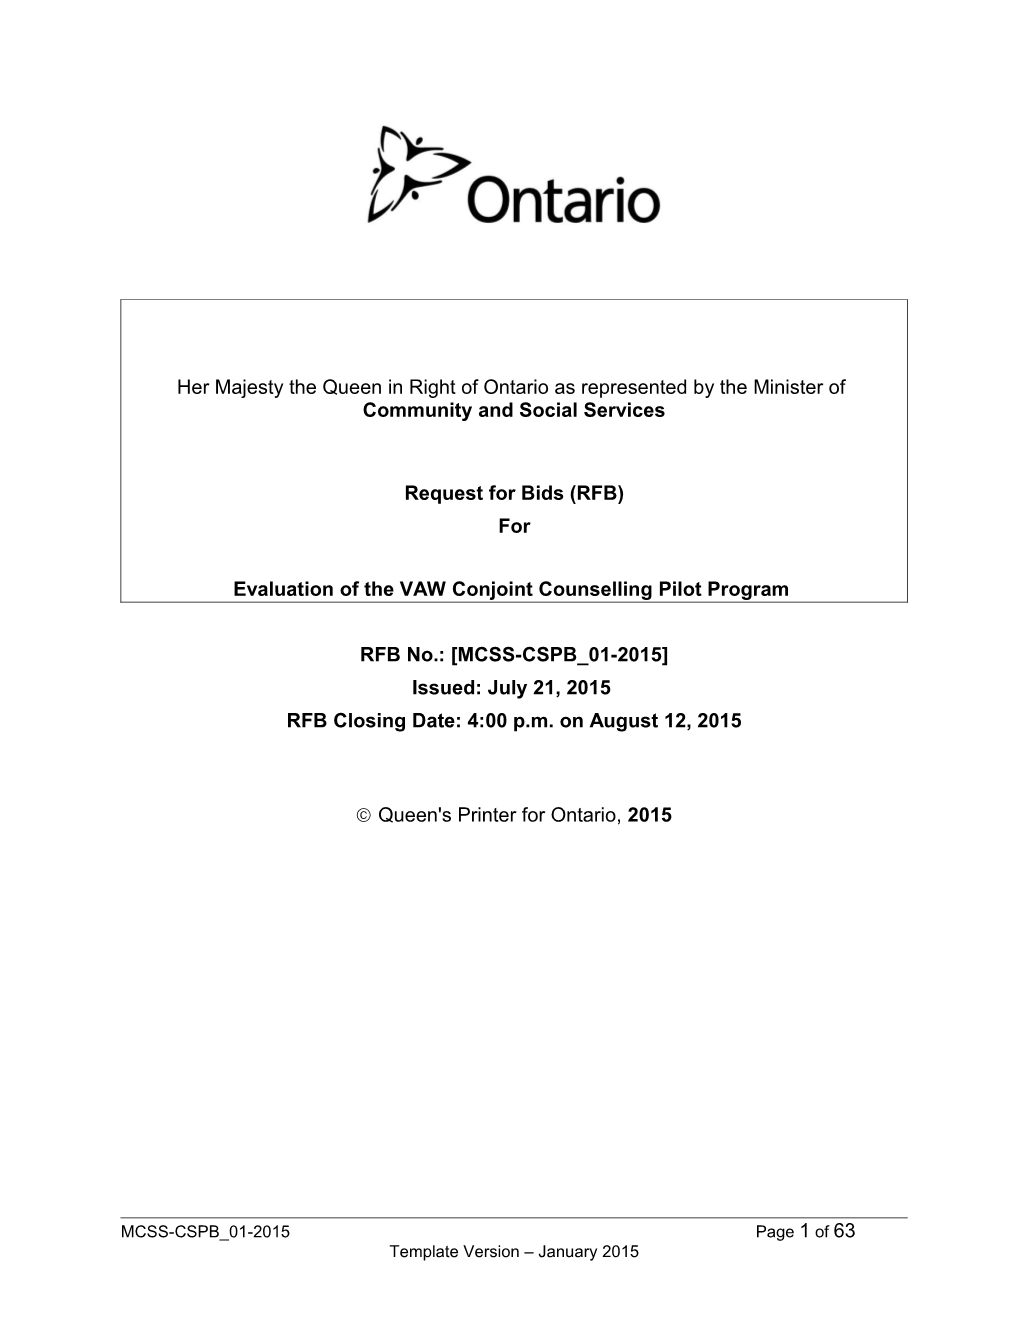 Evaluation of the VAW Conjoint Counselling Pilot Program